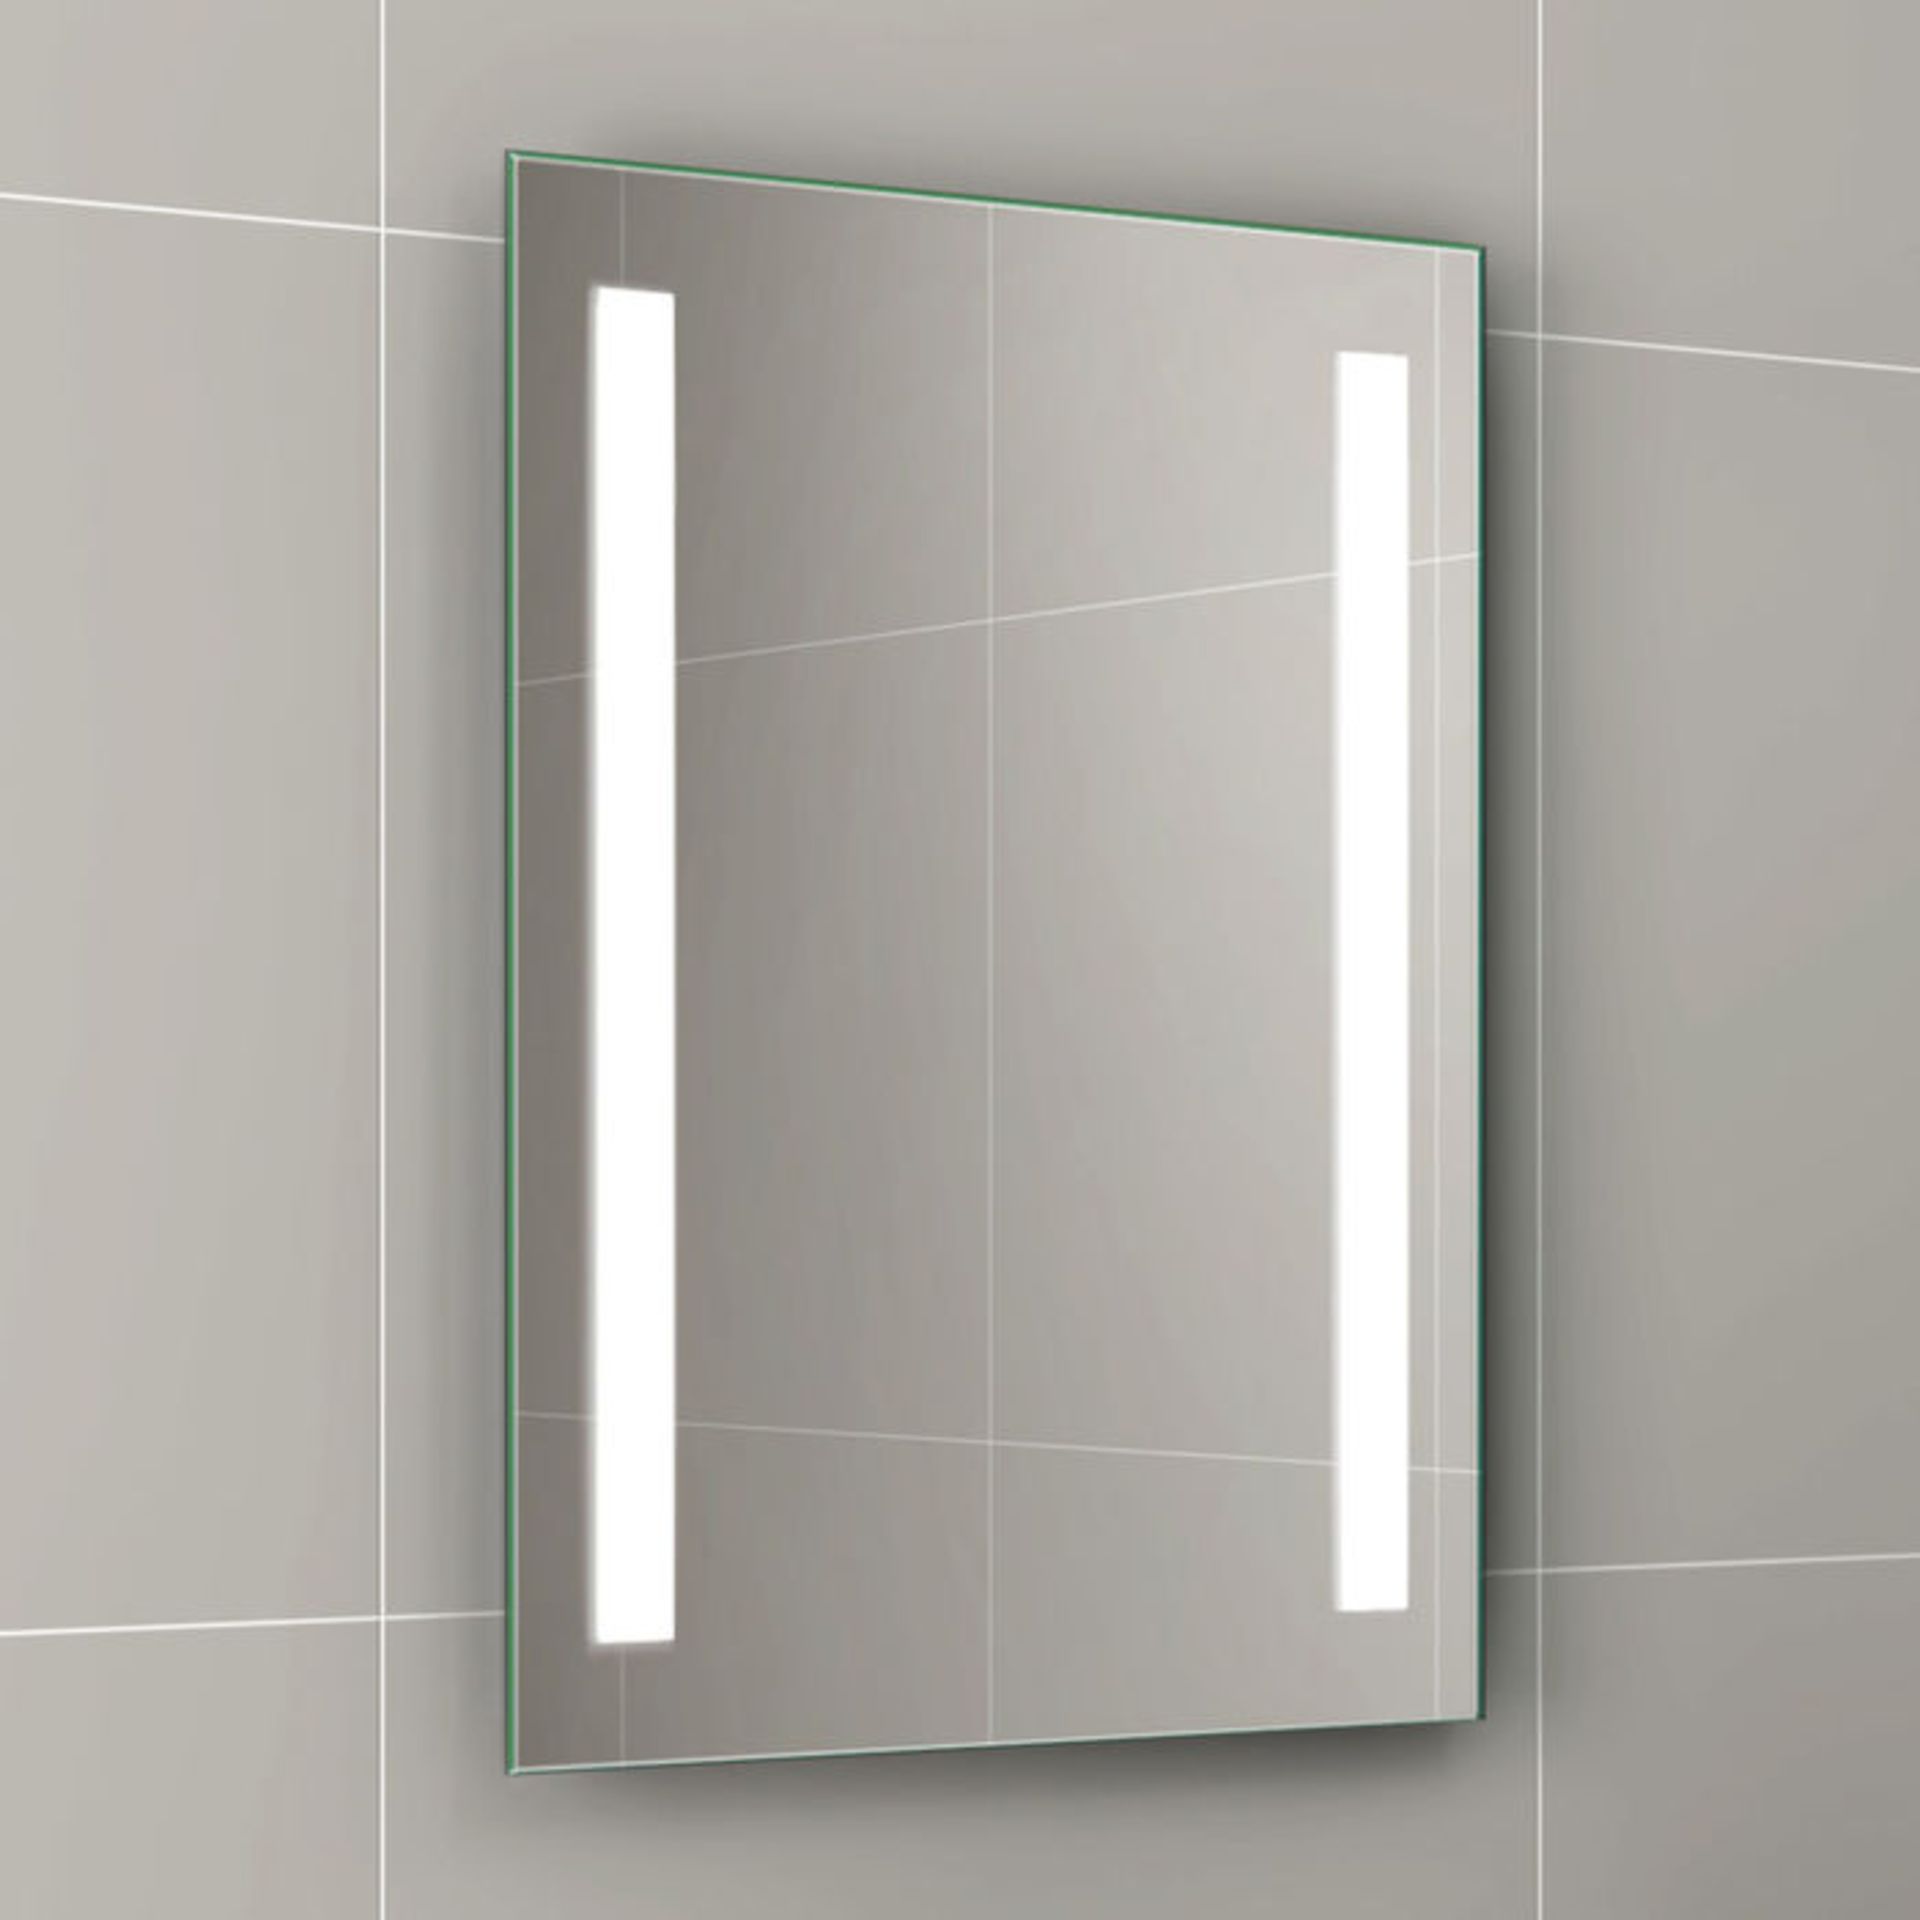 (SA185) 500x700mm Omega Illuminated LED Mirror - Battery Operated. Energy saving controlled On / Off - Image 2 of 3